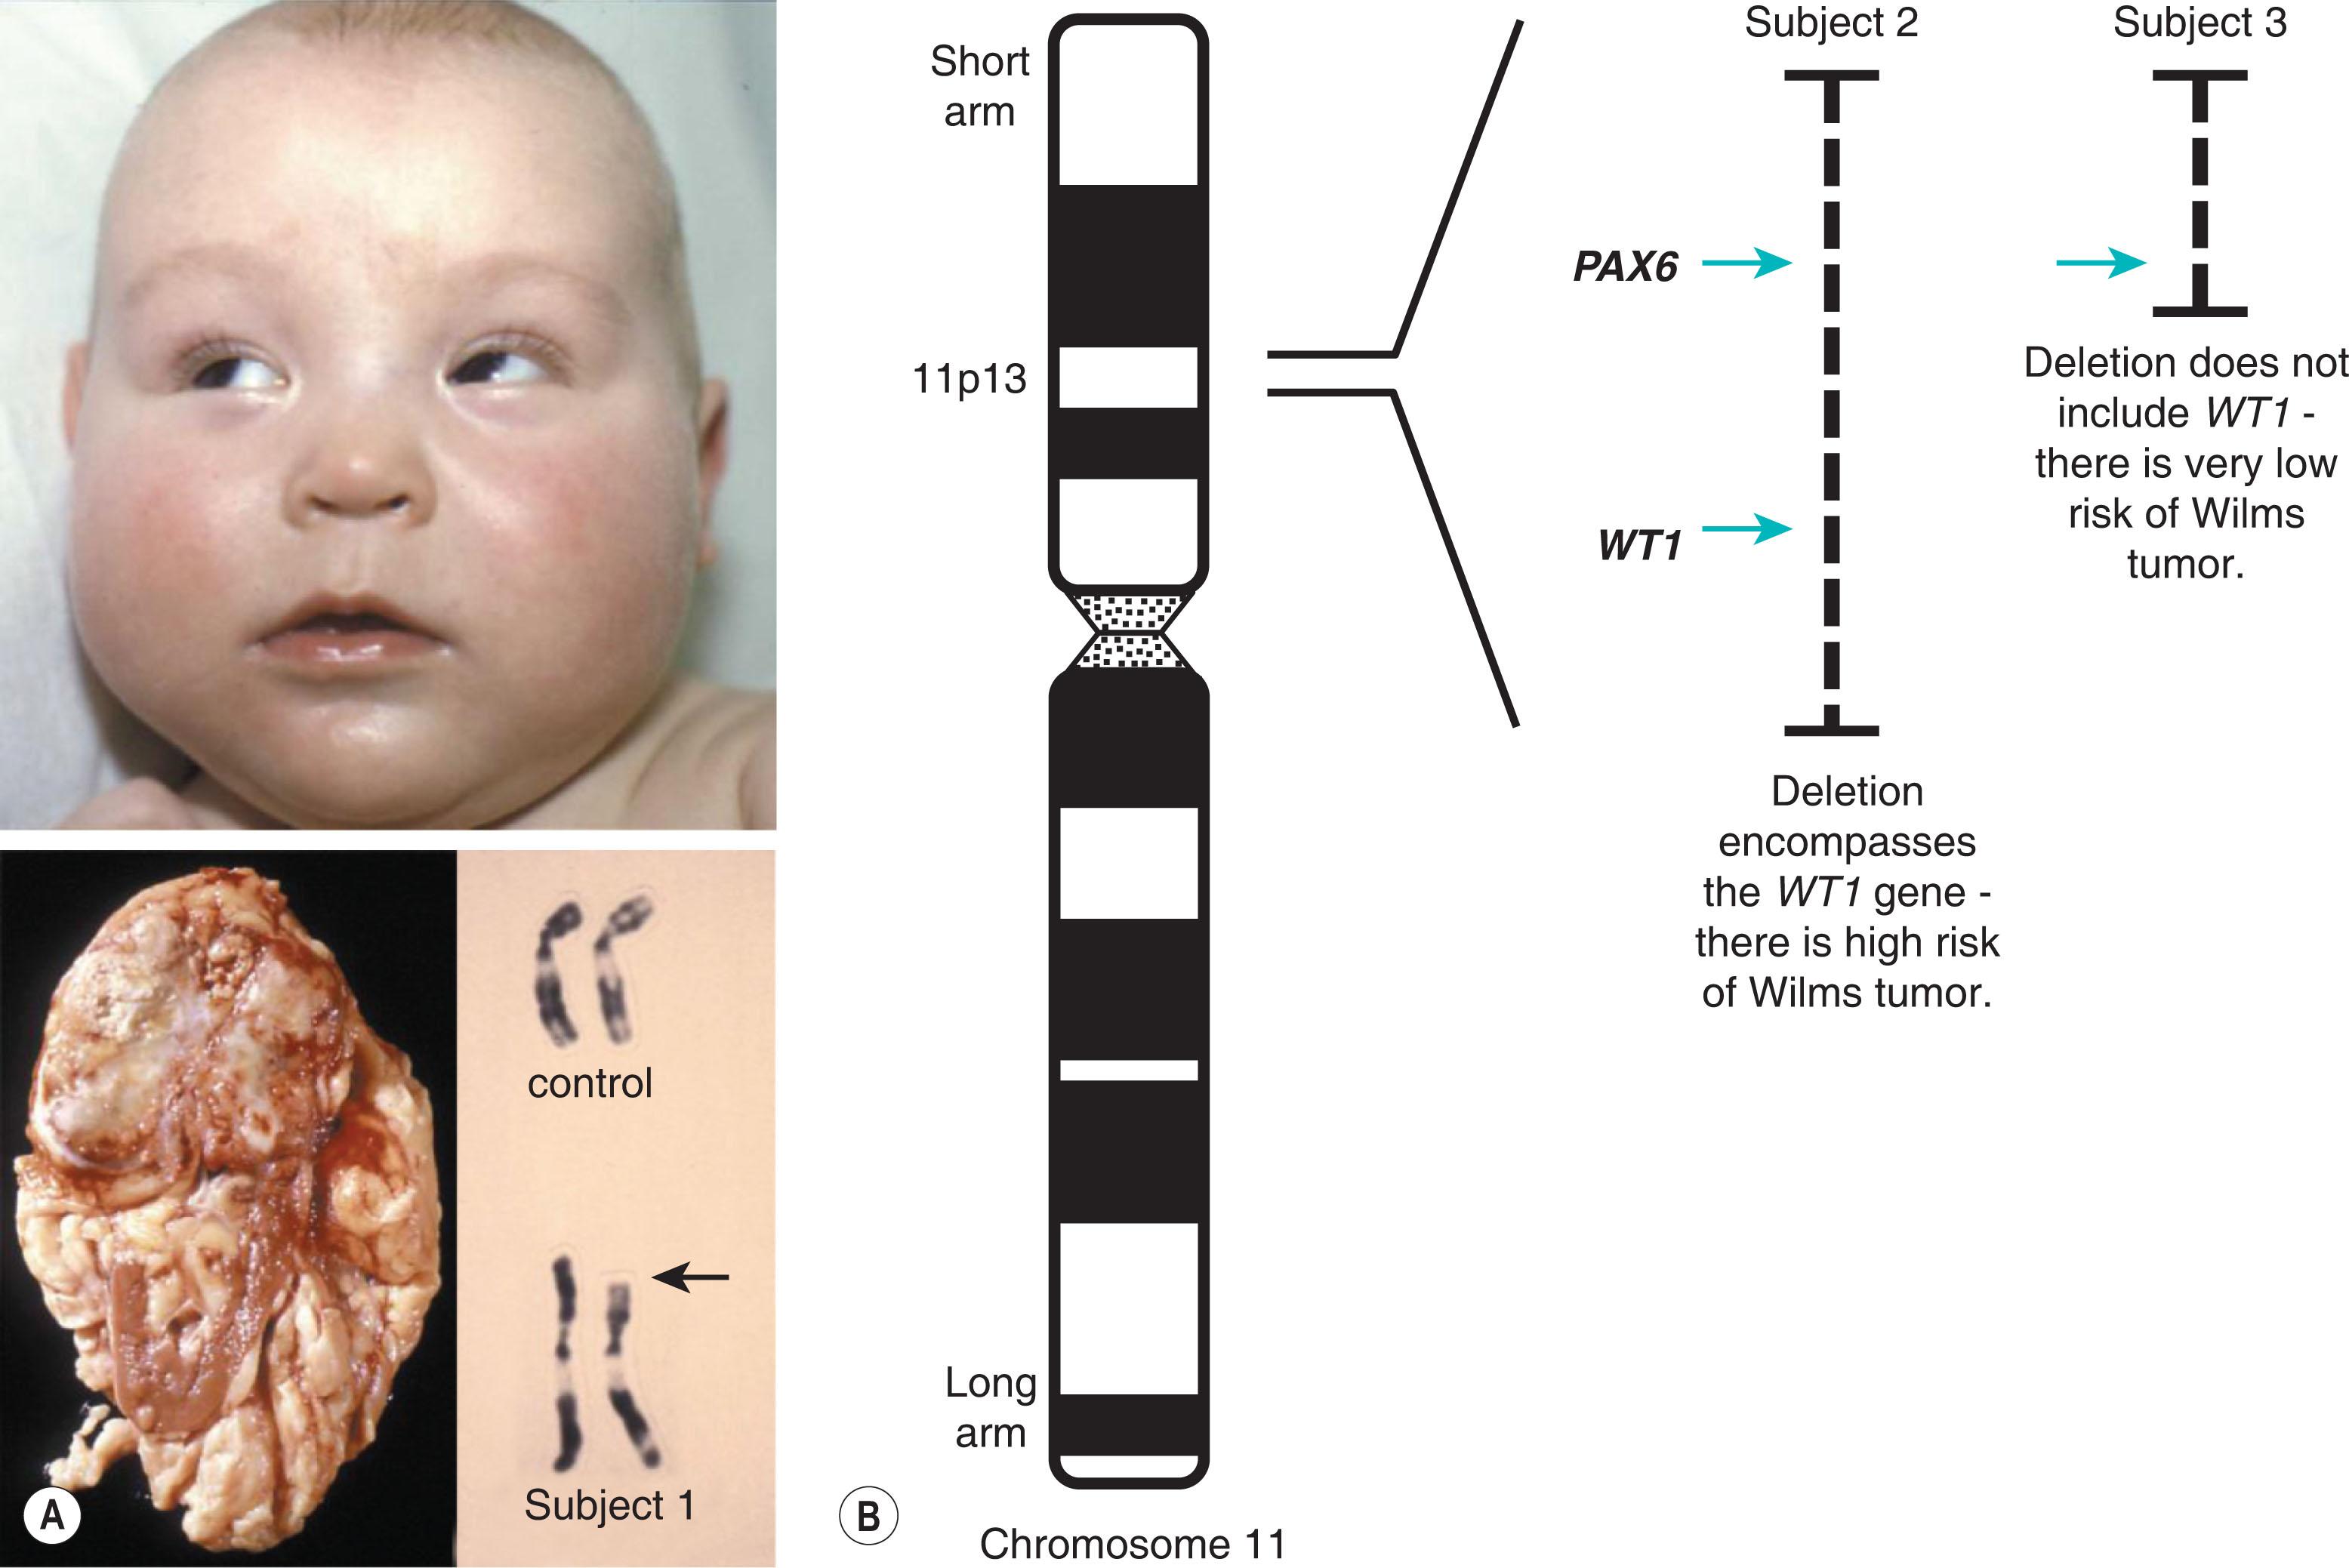 Fig. 10.3, Aniridia caused by deletions in chromosome 11. (A) A child presented with cognitive impairment, genitourinary abnormalities, and aniridia (subject 1, top row); there was no relevant family history. He was subsequently found to have a Wilms tumor in the superior pole of his kidney (bottom row, left). Karyotype analysis revealed a deletion in the short arm of chromosome 11, which encompasses the PAX6 (aniridia) and the WT1 (Wilms tumor) genes (bottom row, right; arrow highlights the deleted region). (B) Subjects 2 and 3 were born with sporadic aniridia. Karyotype analysis was normal but further cytogenetic analysis revealed submicroscopic deletions in both patients. The deletion in Subject 2 removed a copy of the PAX6 and WT1 genes (deletion shown as interrupted line). The deletion in Subject 3 was smaller and only removed a copy of the PAX6 gene; the WT1 gene was unaffected with two normal copies. Consequently, Subject 2 is at high risk of developing Wilms tumor (one WT1 gene copy), while Subject 3 is not at risk (two WT1 gene copies).